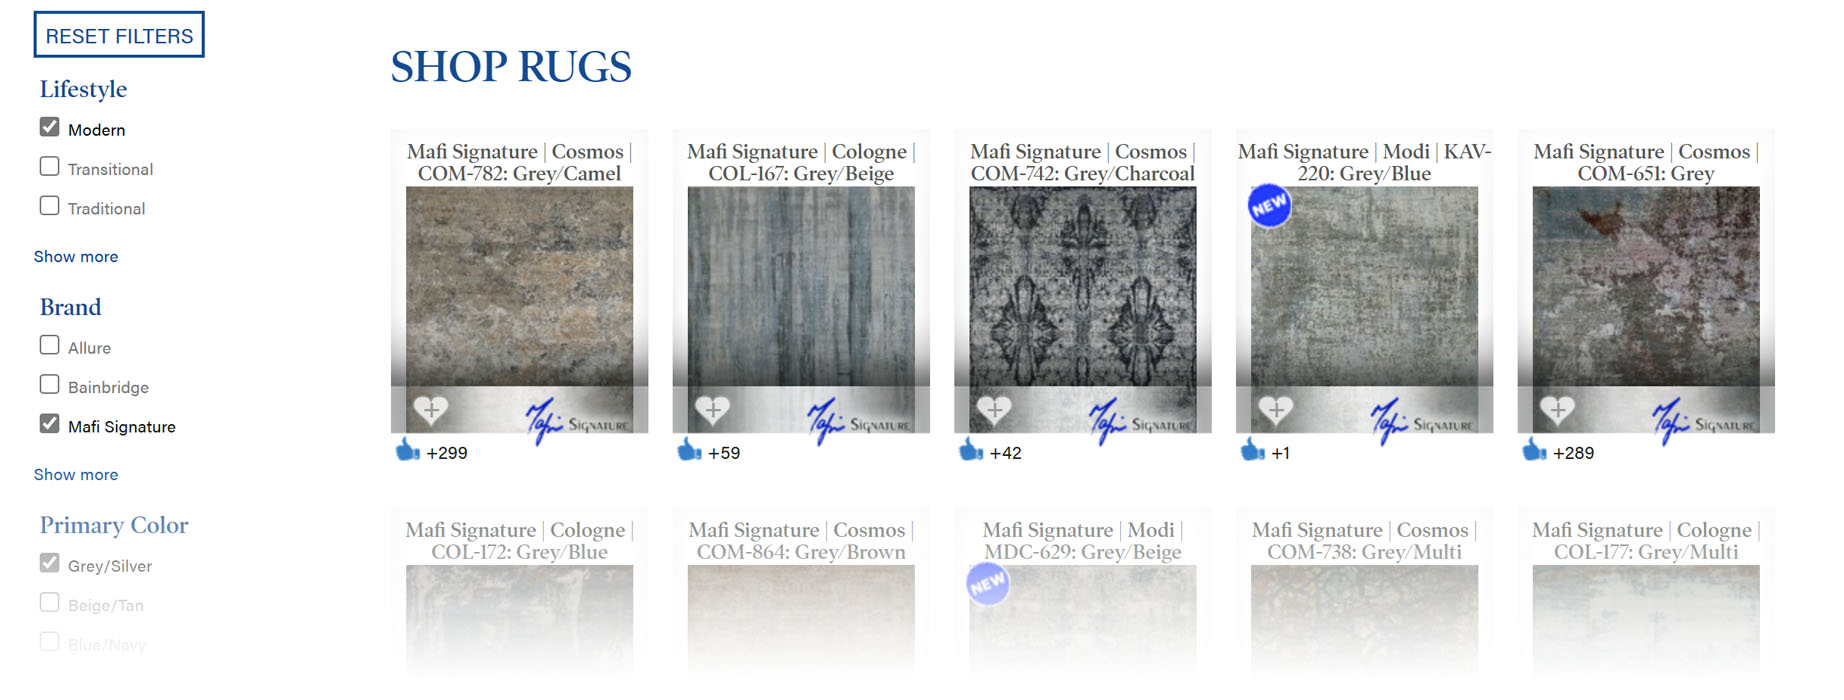 Sort by price, color, style and more at mafirugs.com shop rugs page.